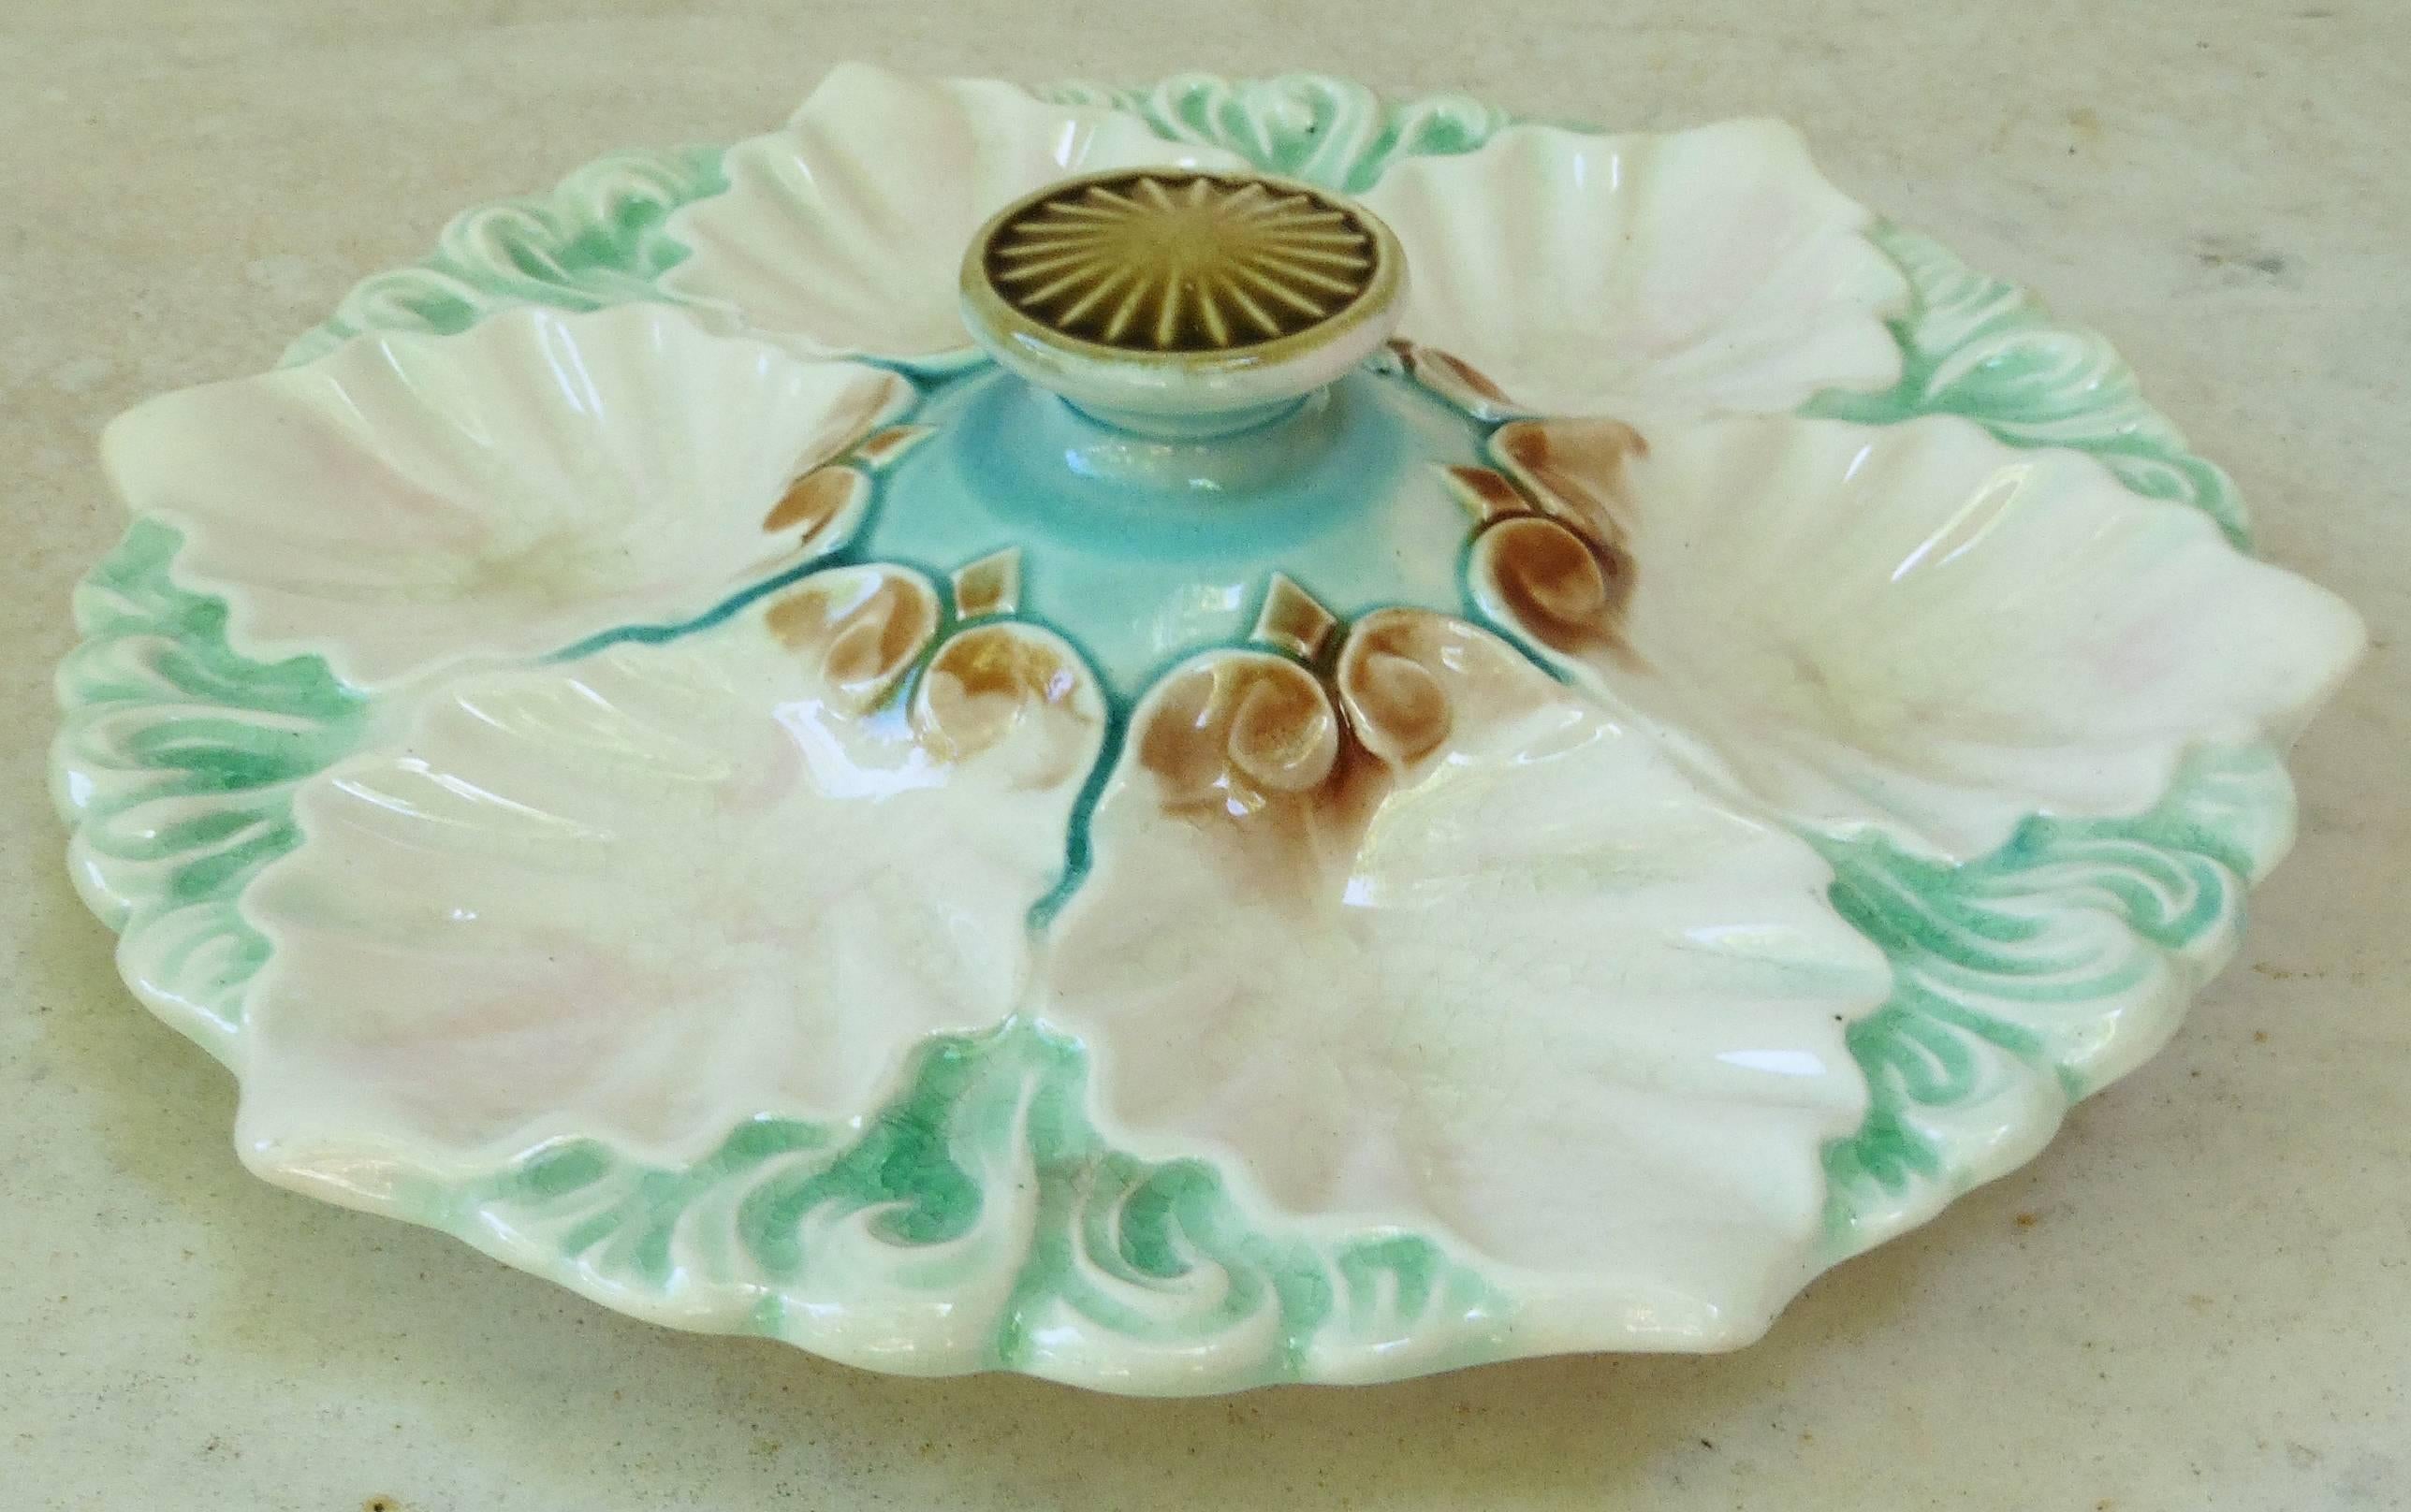 Majolica handled oyster plate with handle on the center from Orchies, circa 1890.